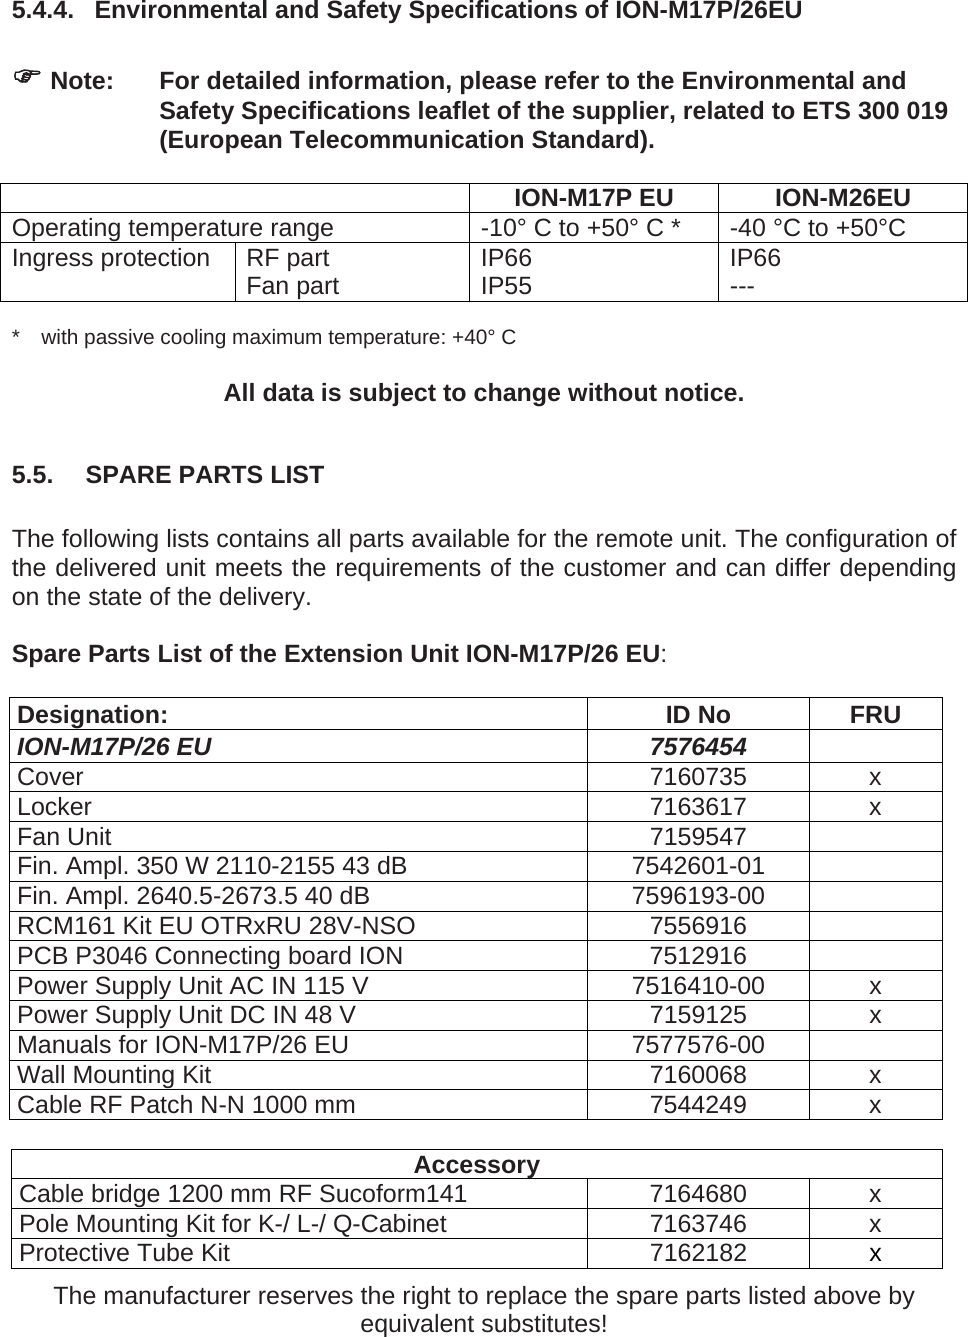   5.4.4.  Environmental and Safety Specifications of ION-M17P/26EU   Note:  For detailed information, please refer to the Environmental and Safety Specifications leaflet of the supplier, related to ETS 300 019 (European Telecommunication Standard).   ION-M17P EU ION-M26EU Operating temperature range  -10° C to +50° C *  -40 °C to +50°C Ingress protection  RF part Fan part  IP66 IP55  IP66 ---  *  with passive cooling maximum temperature: +40° C  All data is subject to change without notice.  5.5.  SPARE PARTS LIST  The following lists contains all parts available for the remote unit. The configuration of the delivered unit meets the requirements of the customer and can differ depending on the state of the delivery.  Spare Parts List of the Extension Unit ION-M17P/26 EU:  Designation: ID No FRU ION-M17P/26 EU  7576454   Cover 7160735 x Locker 7163617 x Fan Unit  7159547   Fin. Ampl. 350 W 2110-2155 43 dB  7542601-01   Fin. Ampl. 2640.5-2673.5 40 dB  7596193-00   RCM161 Kit EU OTRxRU 28V-NSO  7556916   PCB P3046 Connecting board ION  7512916   Power Supply Unit AC IN 115 V  7516410-00  x Power Supply Unit DC IN 48 V  7159125  x Manuals for ION-M17P/26 EU  7577576-00   Wall Mounting Kit  7160068  x Cable RF Patch N-N 1000 mm  7544249  x  AccessoryCable bridge 1200 mm RF Sucoform141 7164680  x Pole Mounting Kit for K-/ L-/ Q-Cabinet  7163746  x Protective Tube Kit  7162182  x The manufacturer reserves the right to replace the spare parts listed above by equivalent substitutes!  